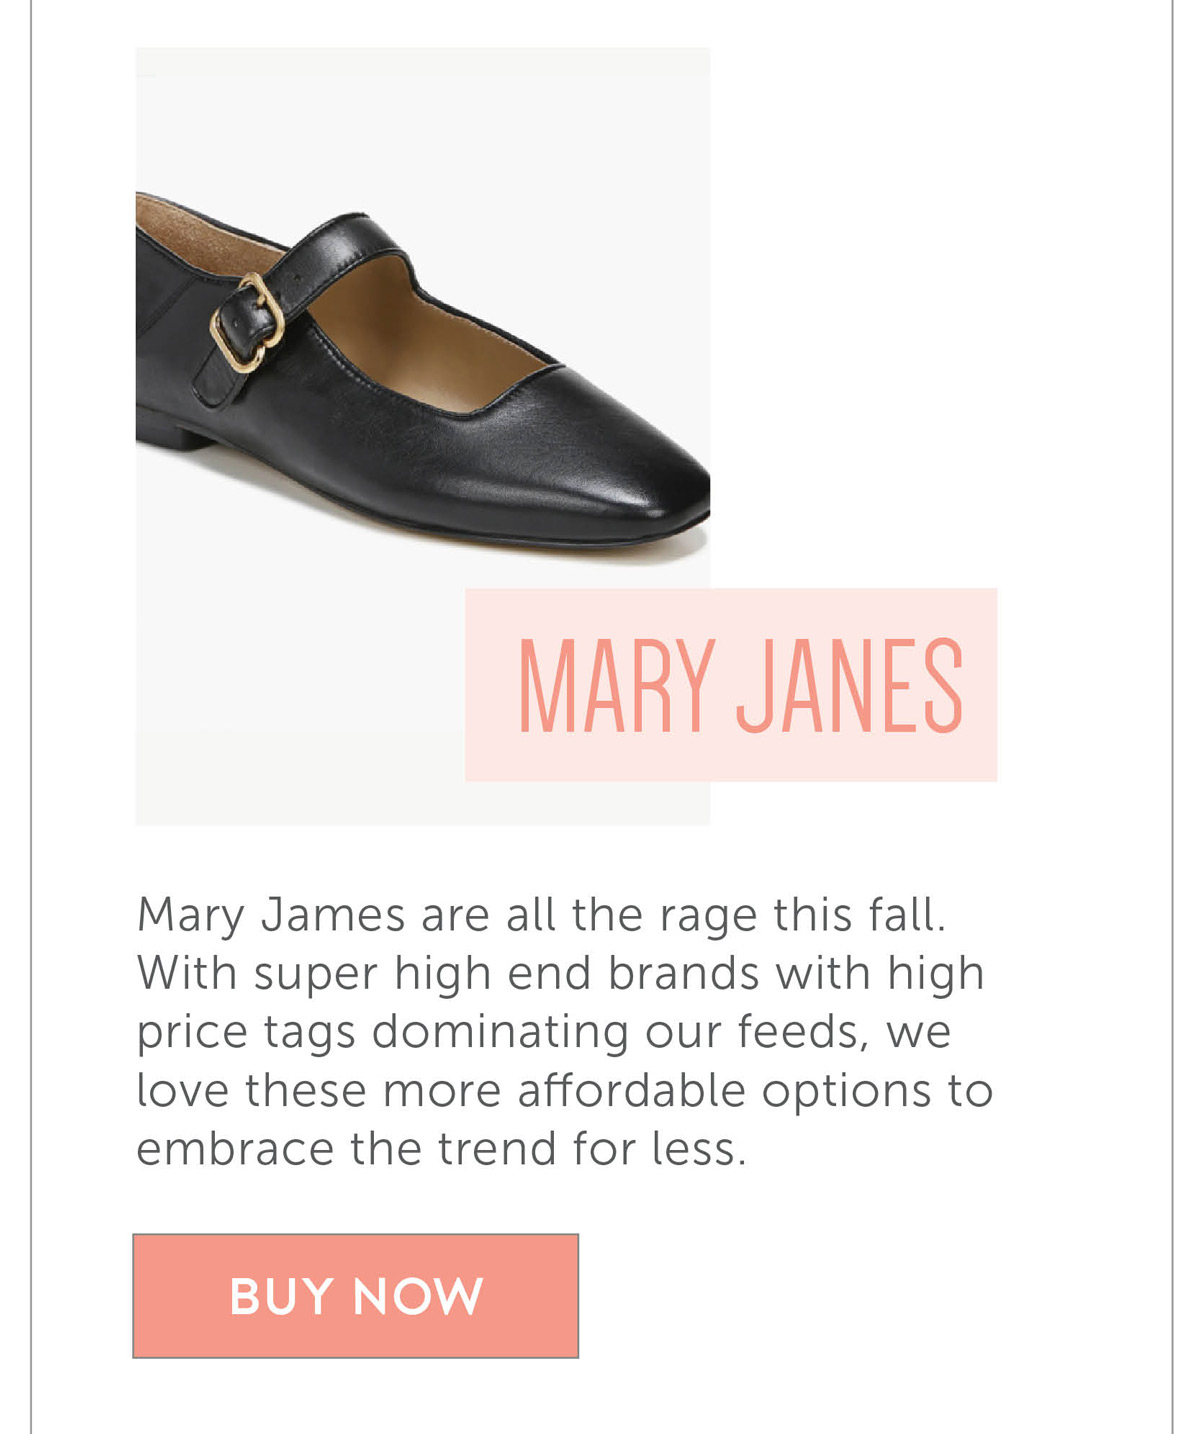 Mary James are all the rage this fall. With super high end brands with high price tags dominating our feeds, we love these more affordable options to embrace the trend for less.